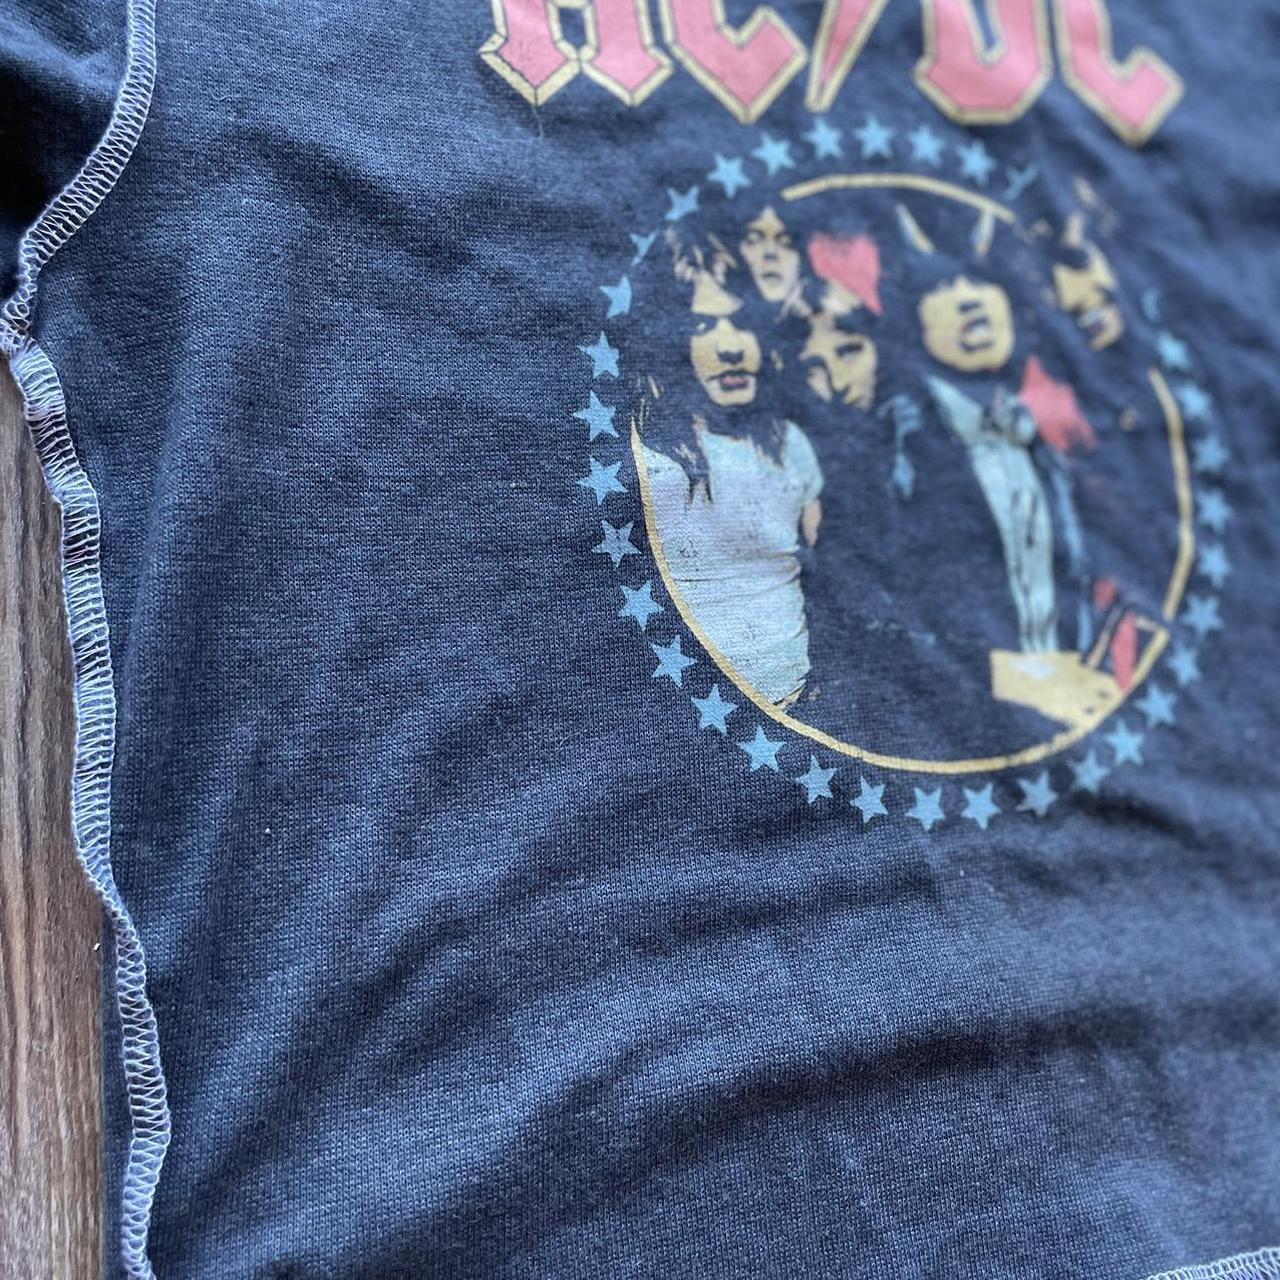 AC/DC ACDC Tour 1979 Cropped Graphic Tee Size M Pre... - Depop